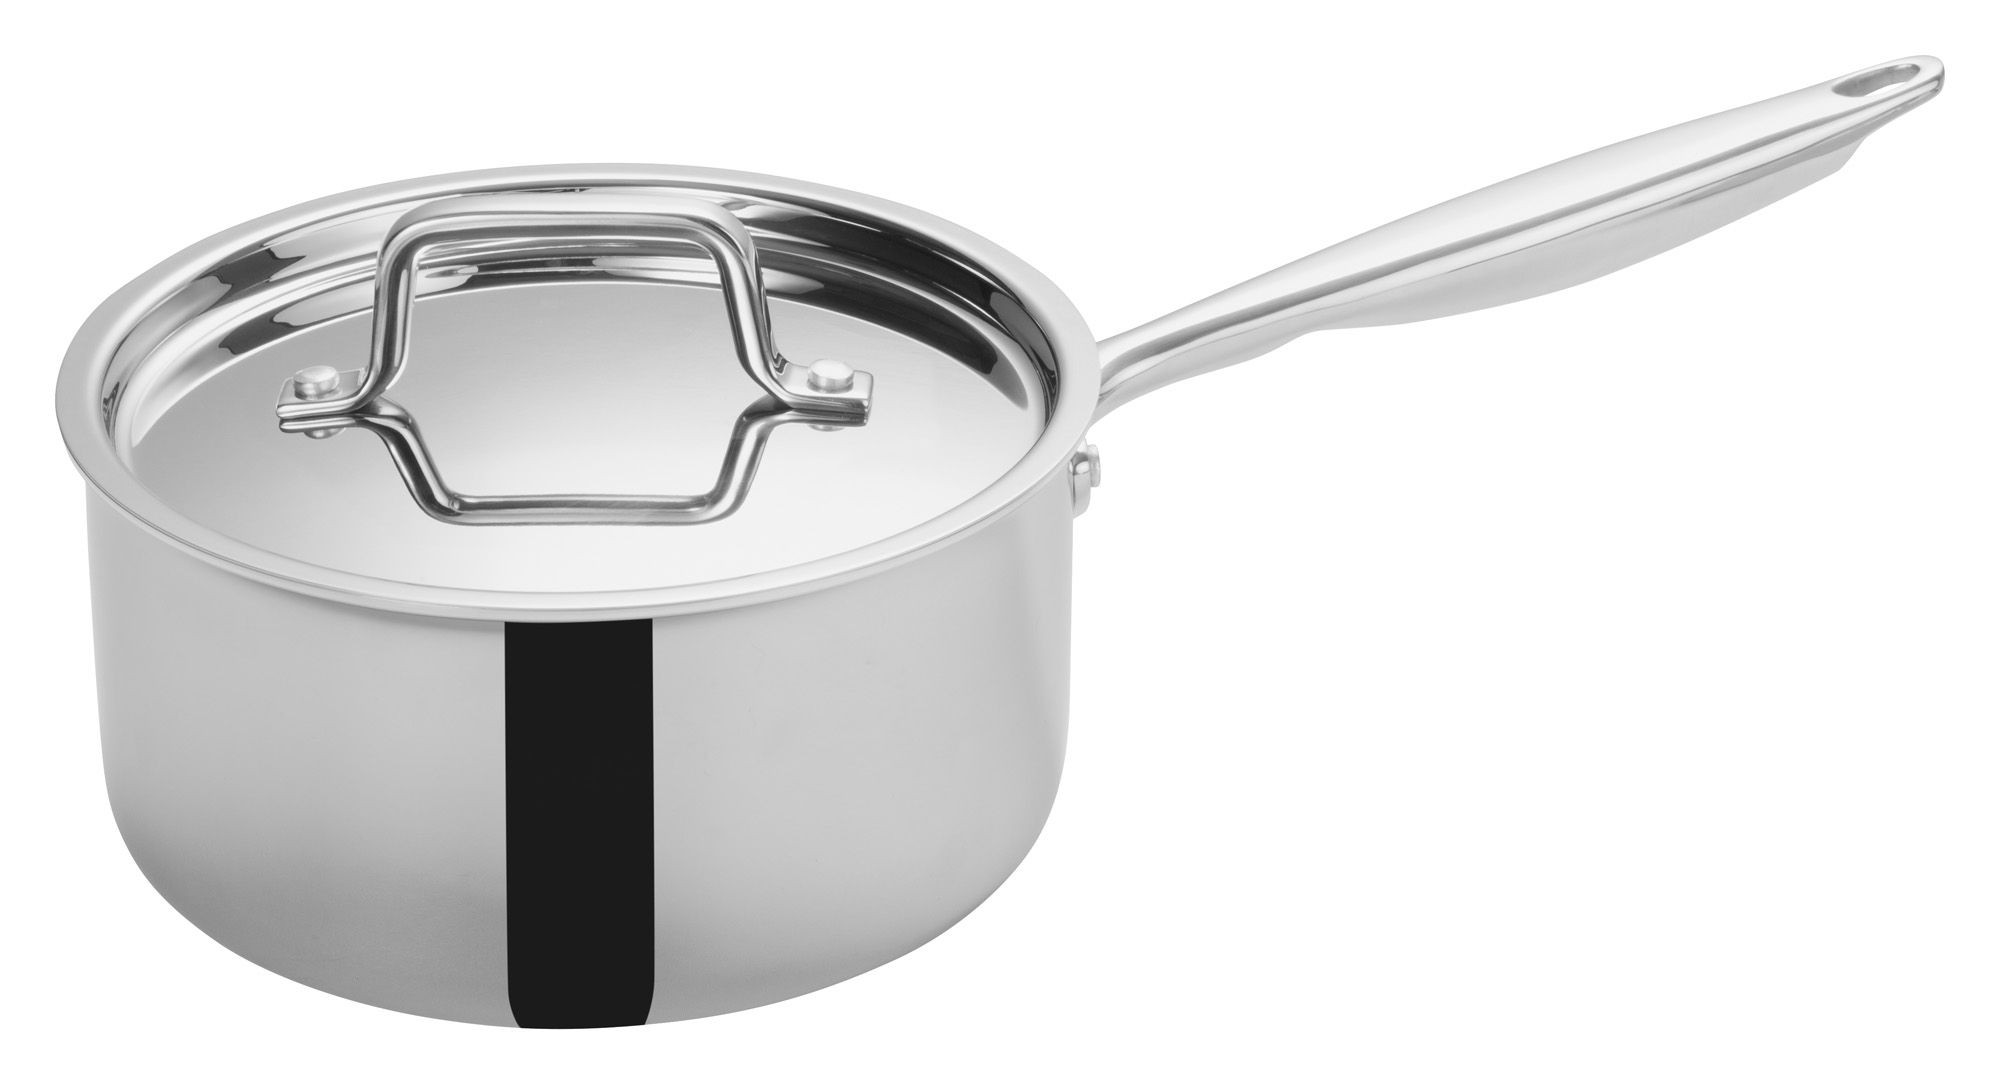 Winco TGAP-4 Tri-Ply Stainless Steel 3.5 Qt. Sauce Pan with Cover